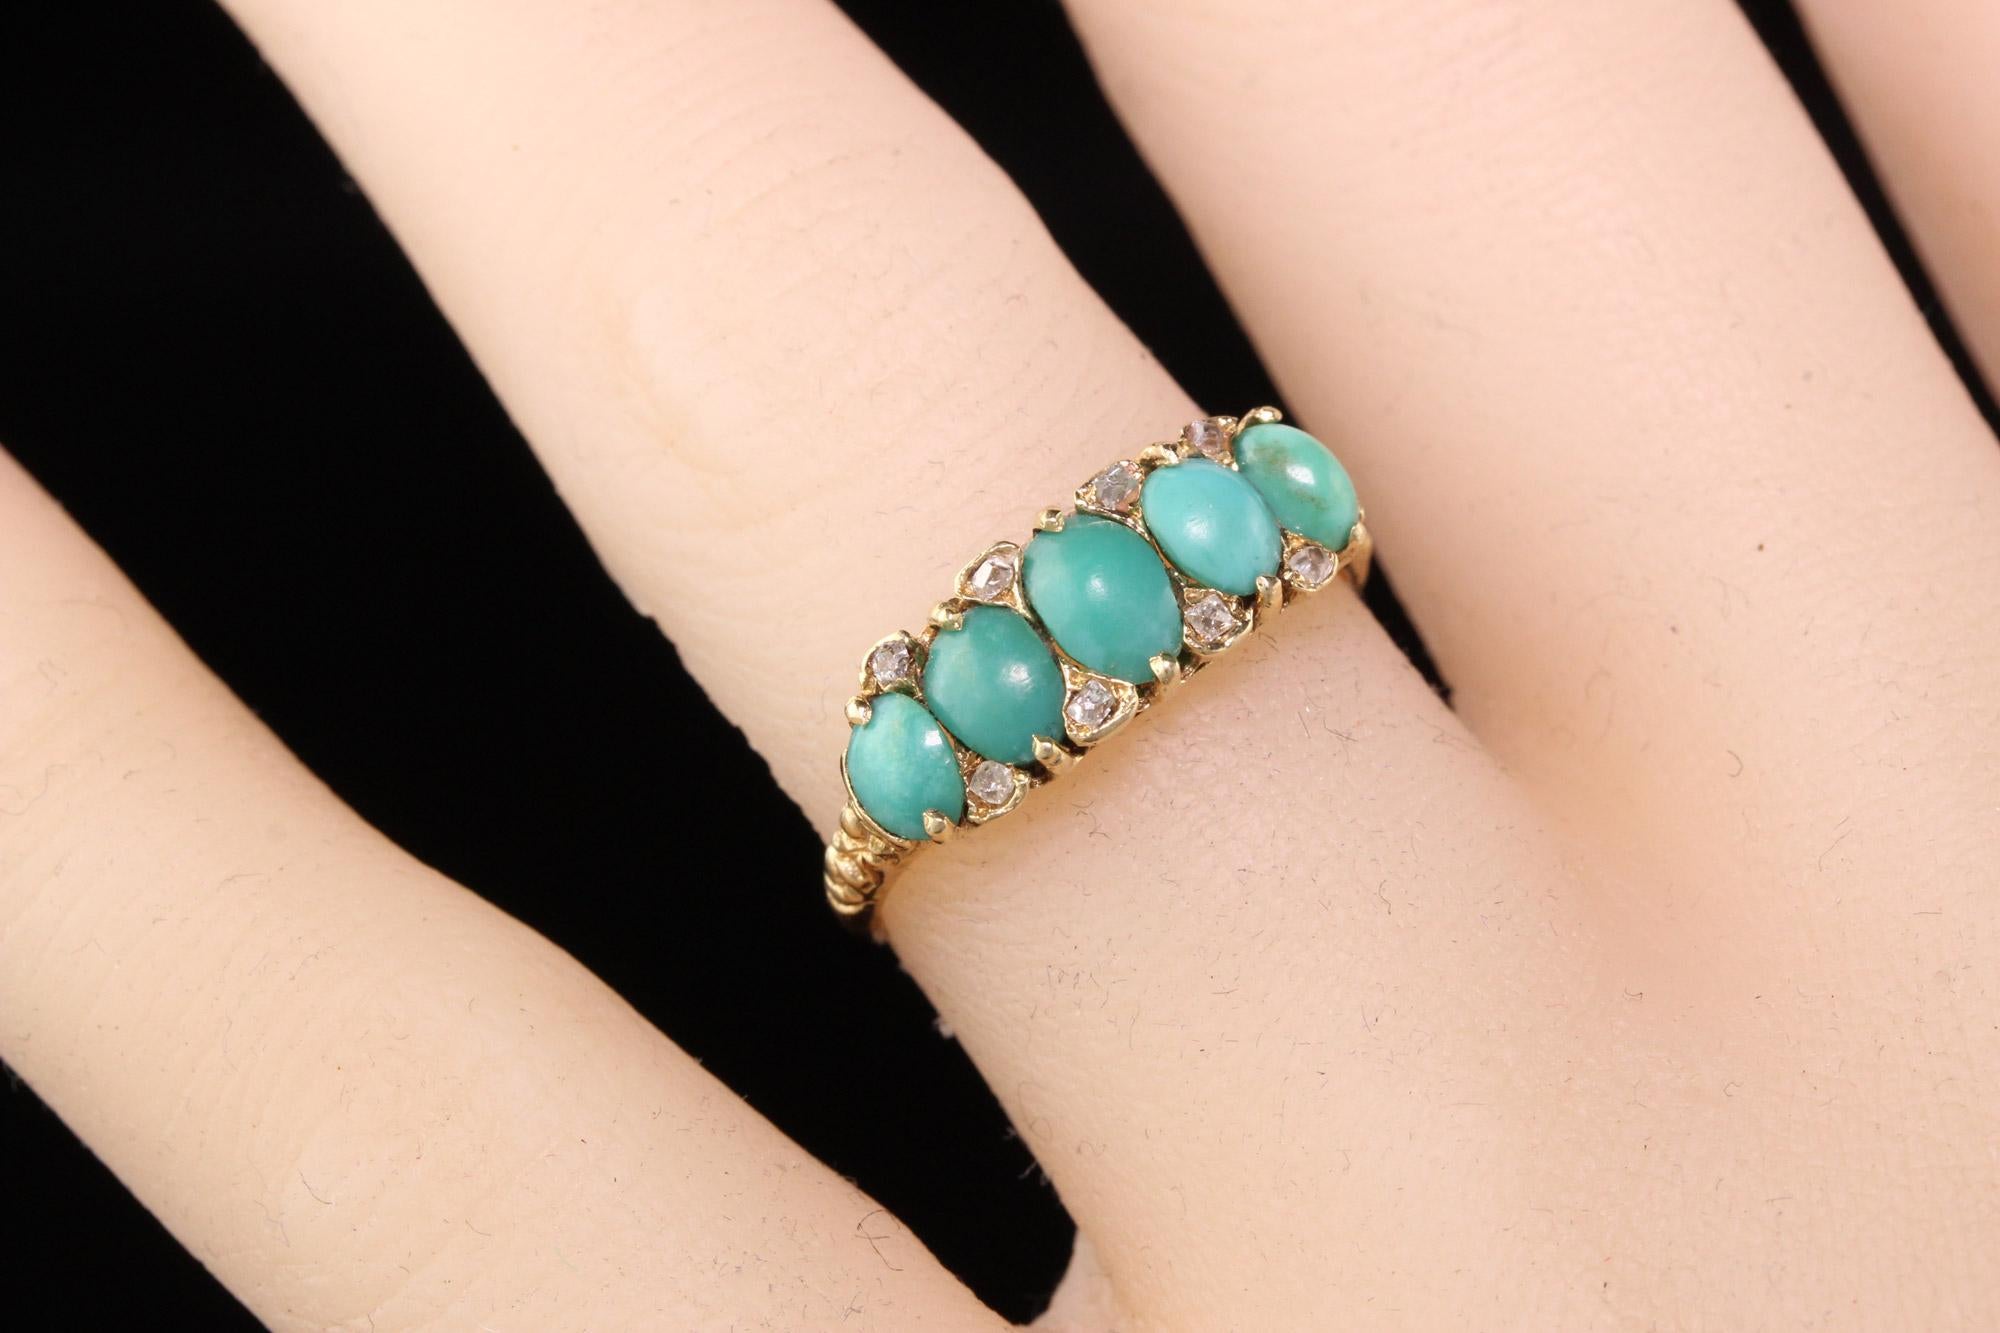 Antique Victorian 14 Karat Yellow Gold Diamond and Turquoise Ring 3